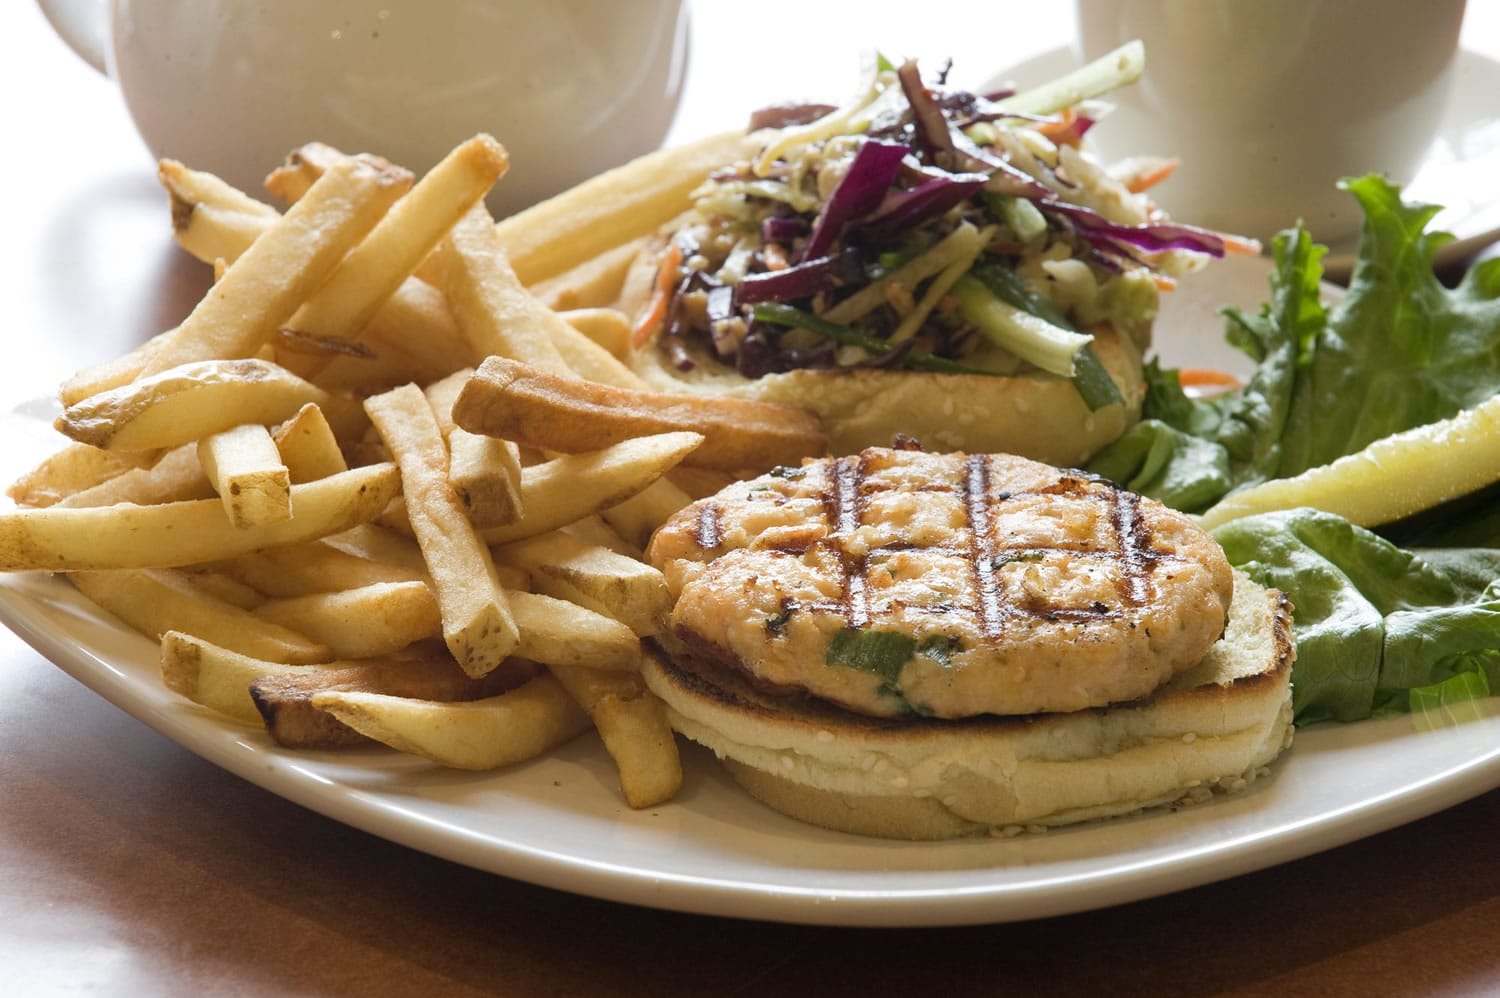 The Salmon Burger comes with Wasabi Mayonnaise and fries at Twin Dragons Asian Cafe at the New Phoenix Casino in La Center.